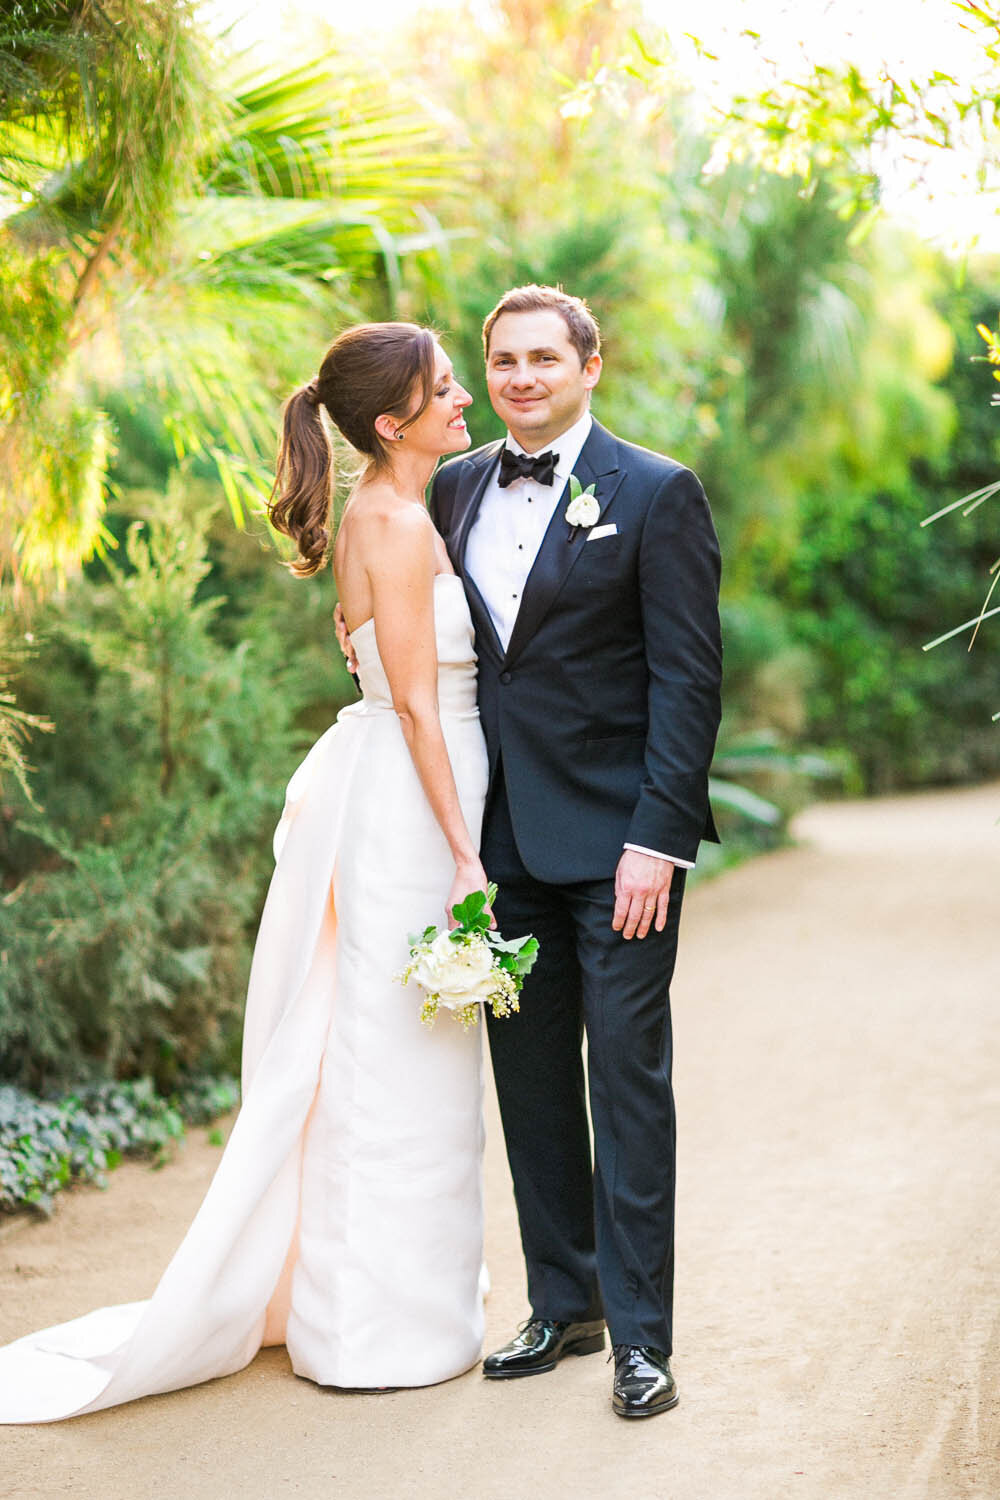 jacqueline_campbell_wedding_photography_parker_palm_springs_045